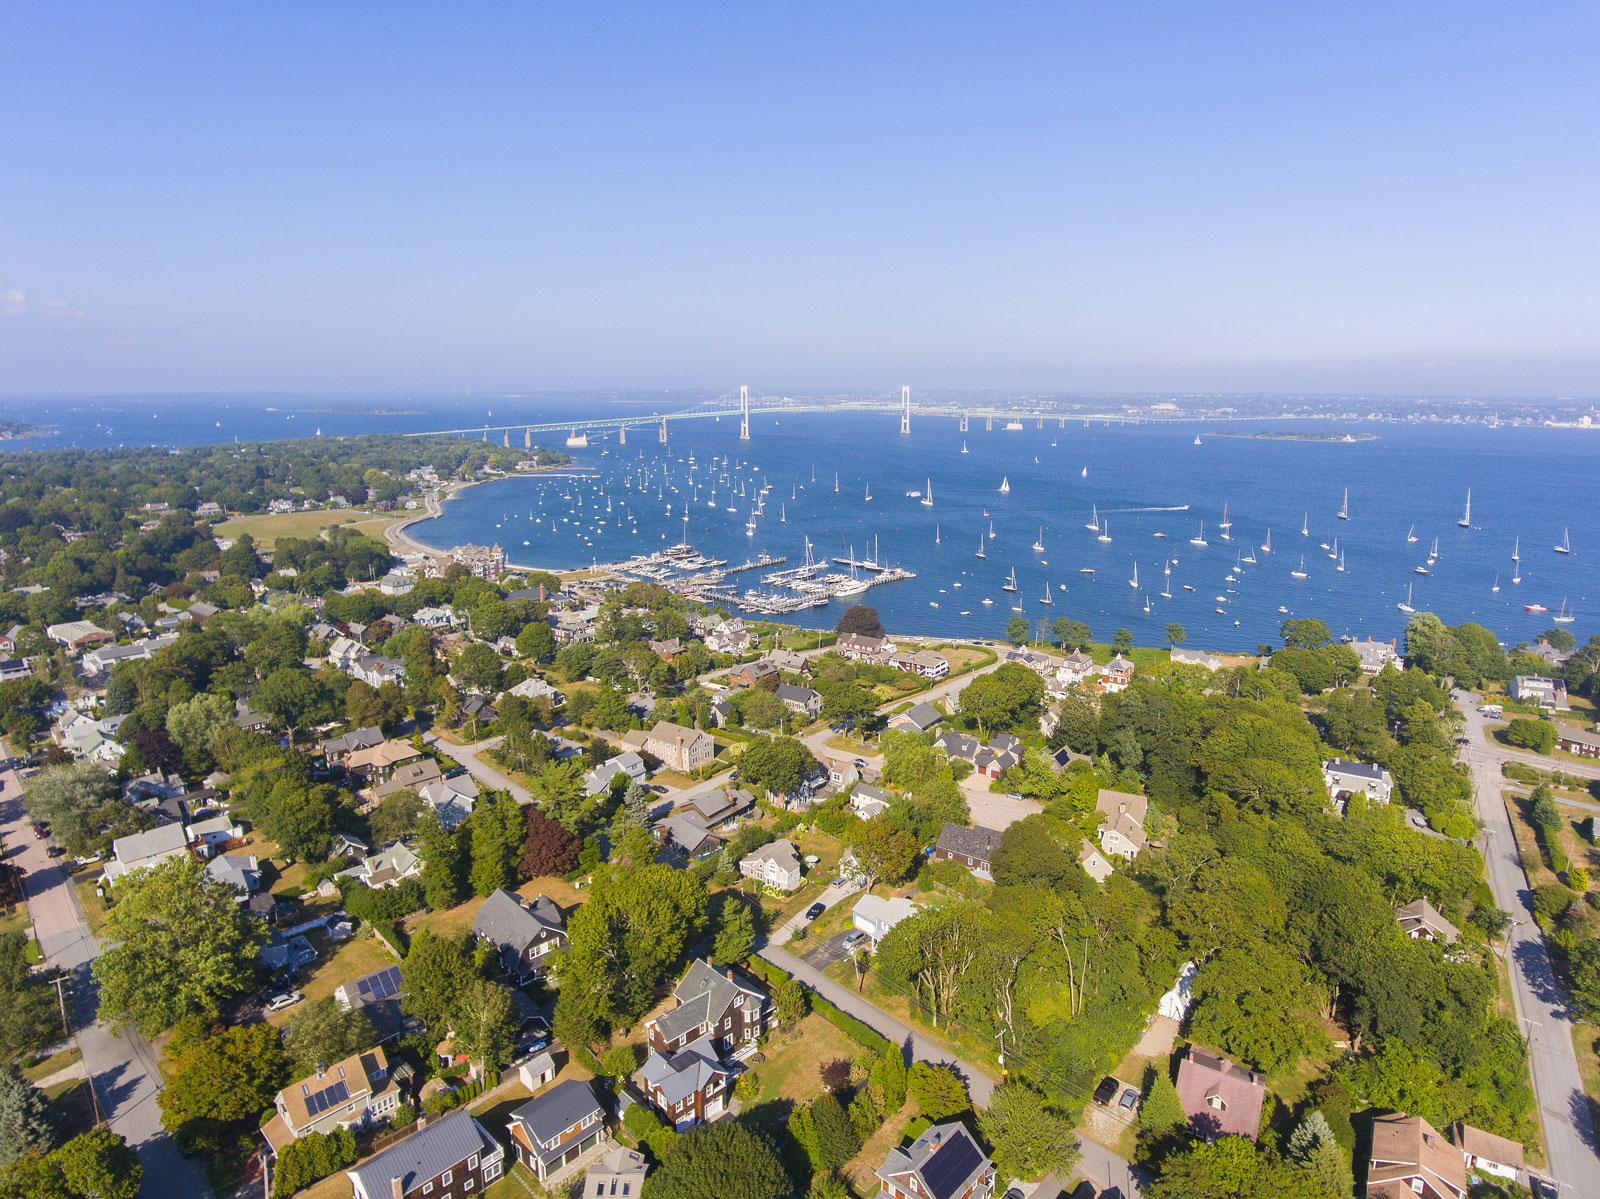 4 Things to See and Do Around Johnston, Rhode Island